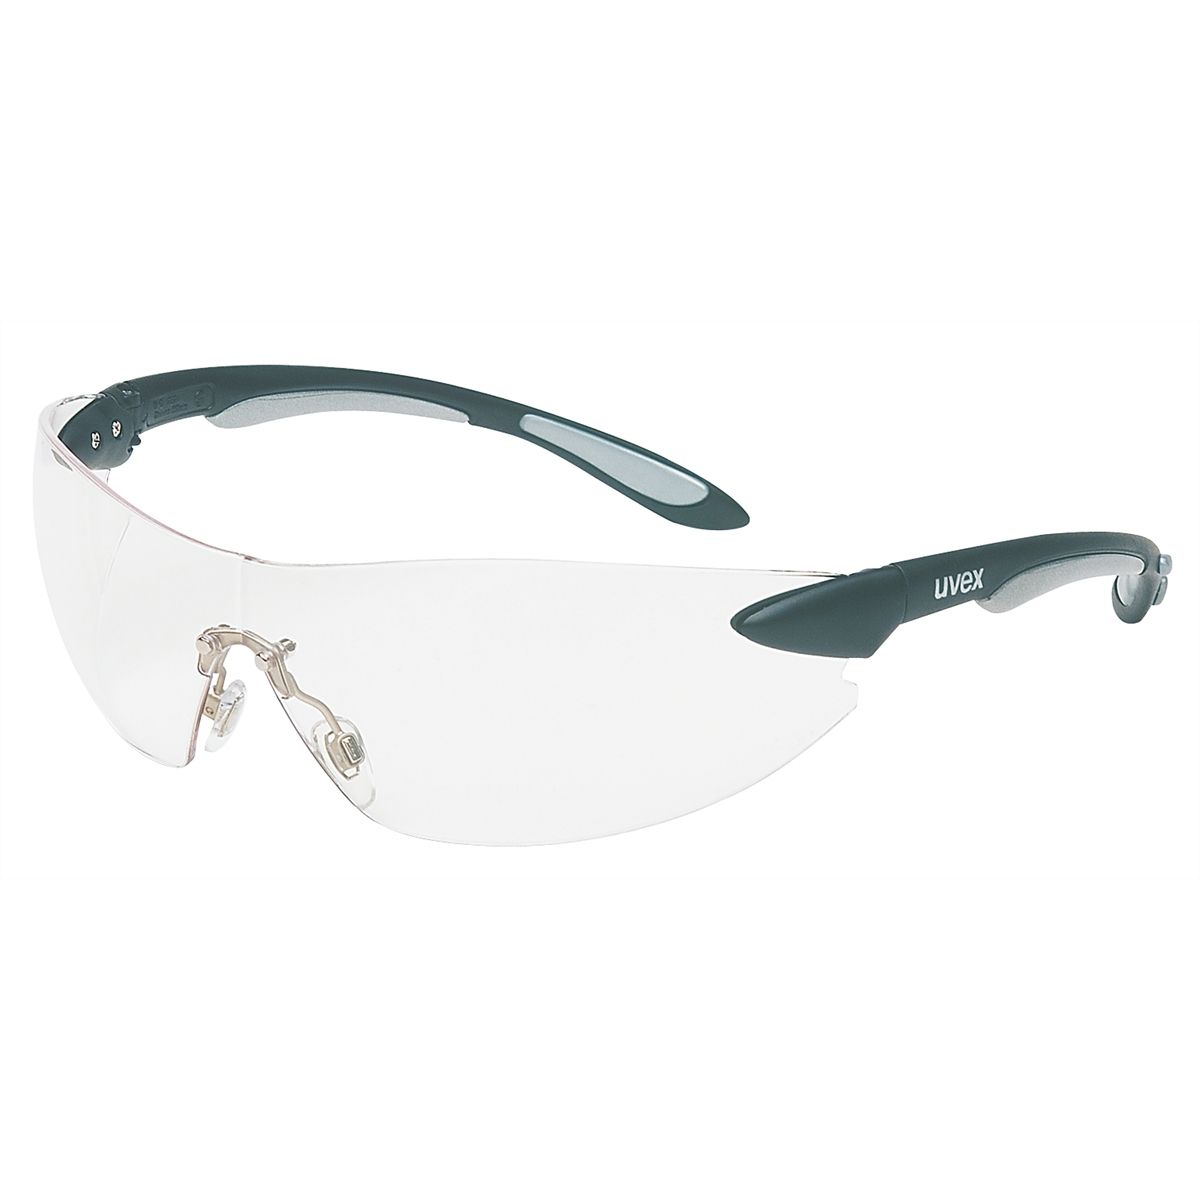 Ignite Safety Glasses - Black and Silver Frames